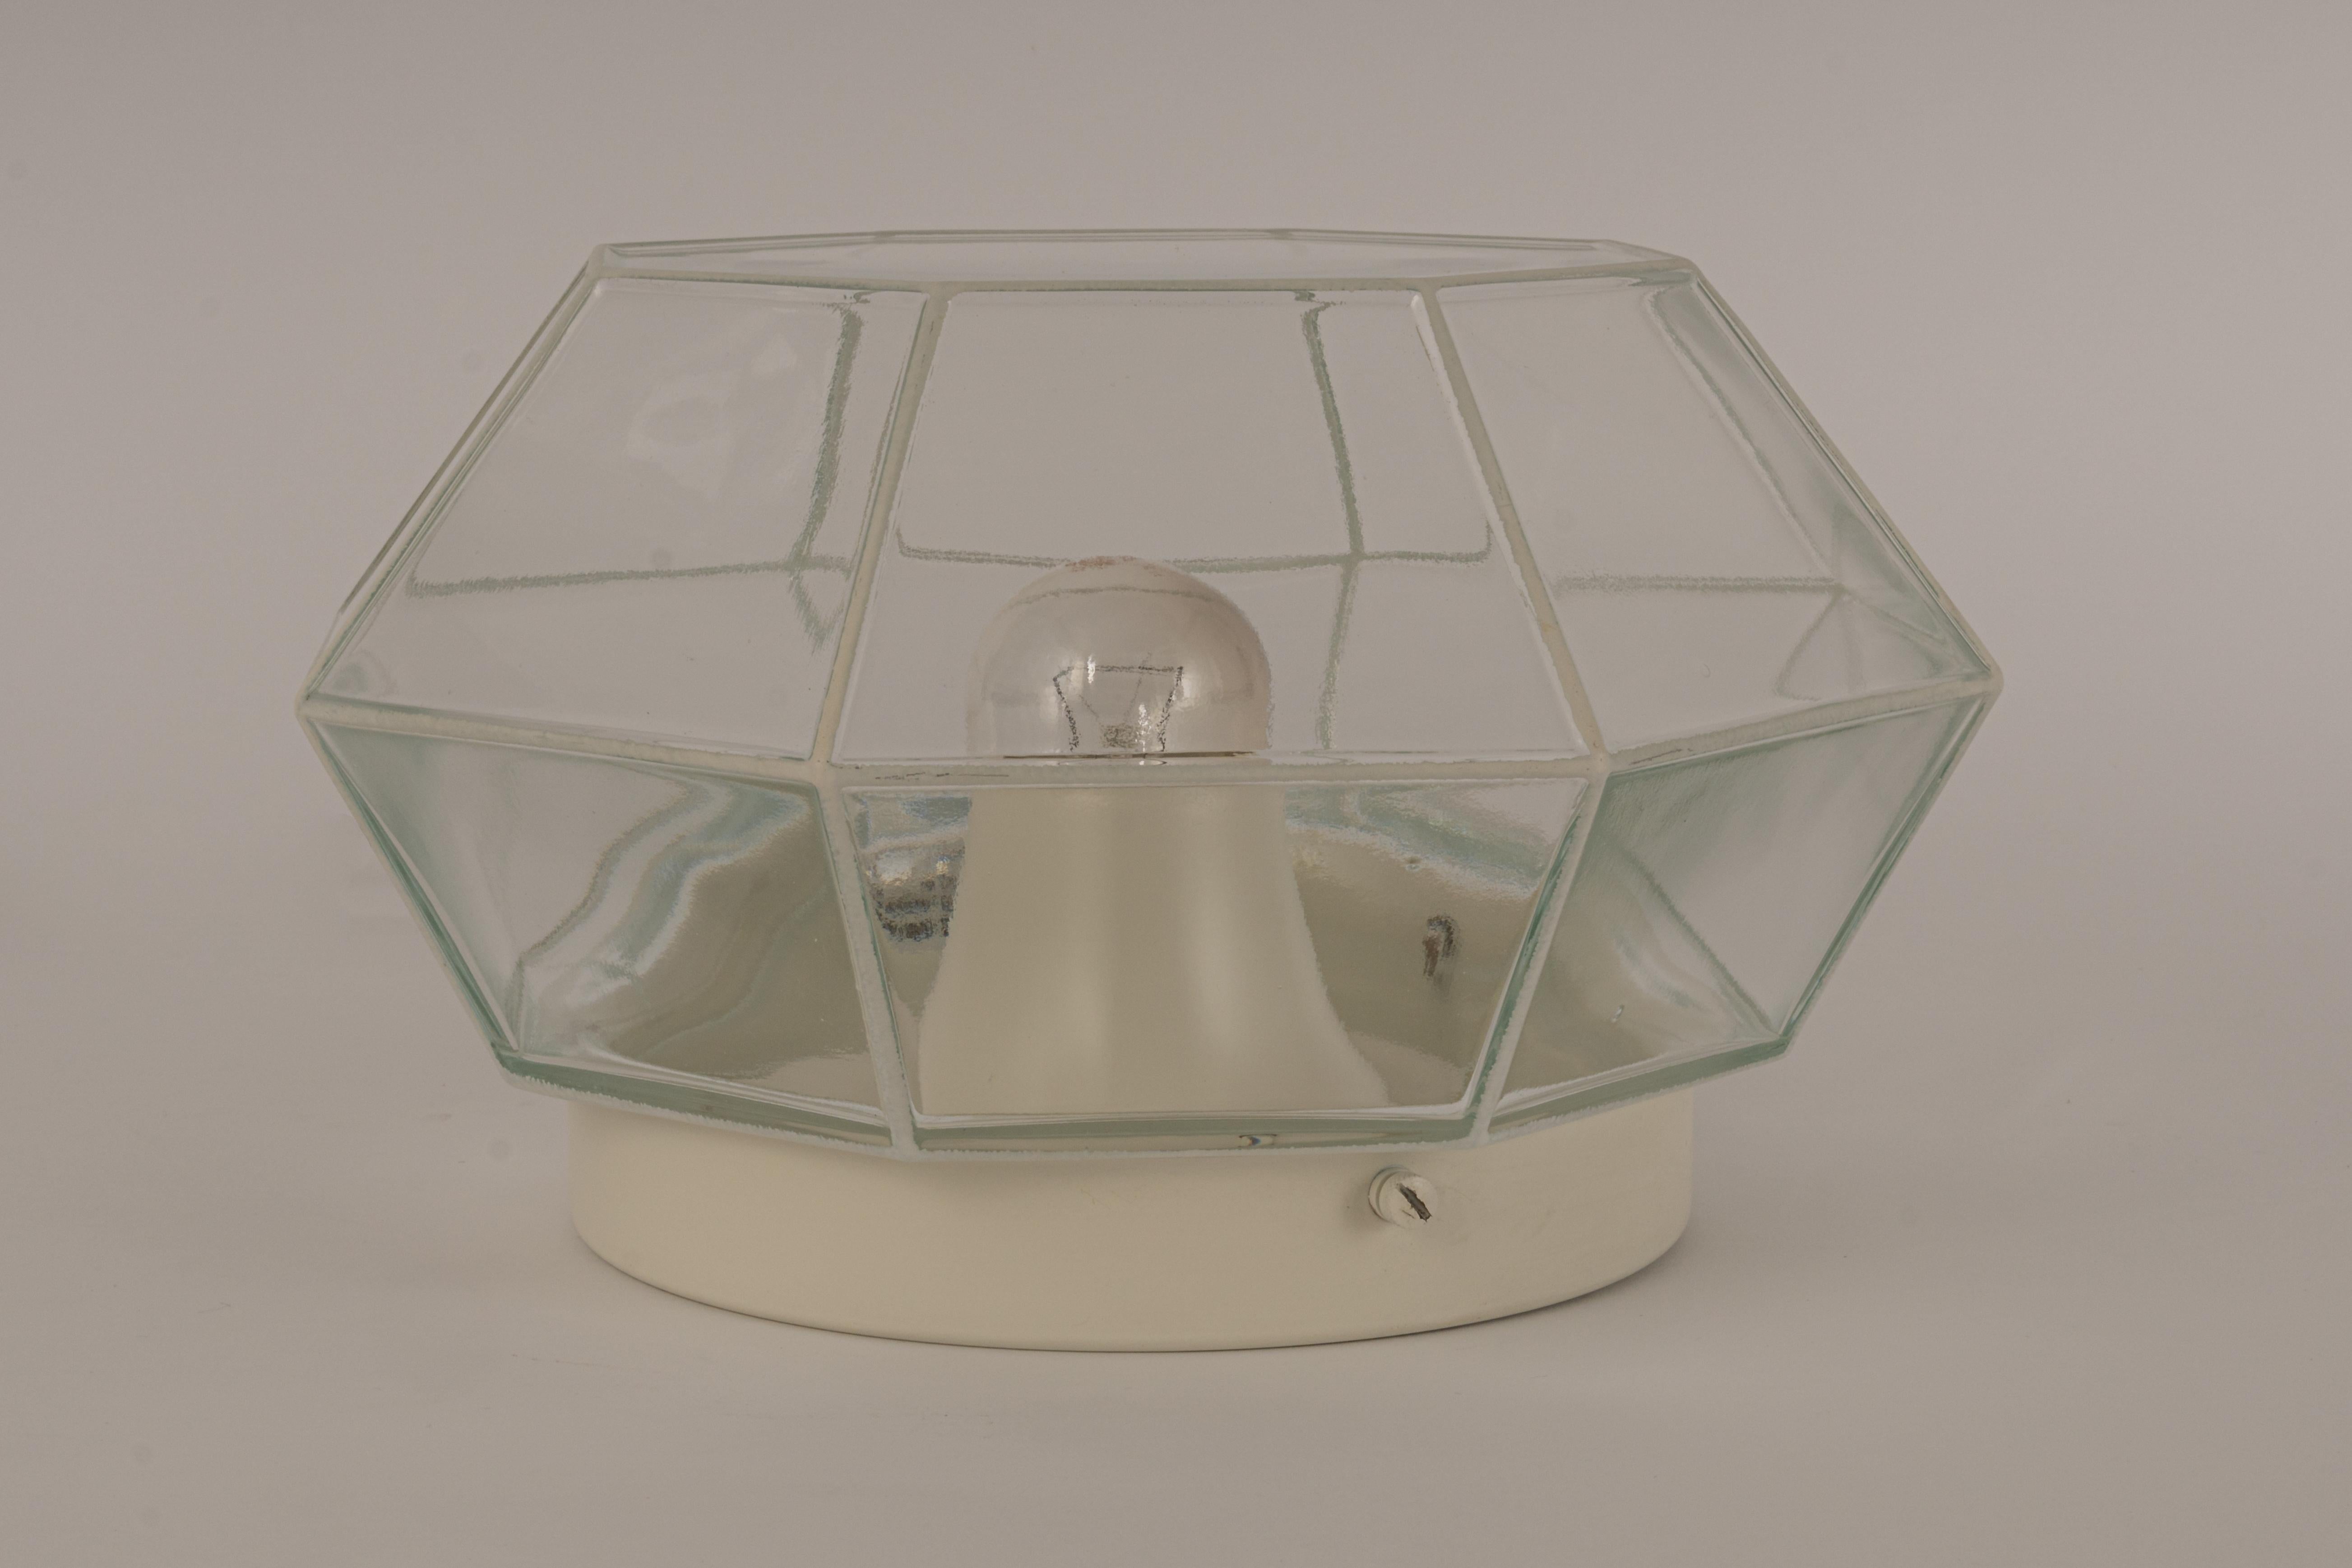 Minimalist iron and clear glass flush mount manufactured by Limburg Glashu¨tte Germany, circa 1960-1969. Octagonal shaped lantern and multifaceted clear glass.

Each light requires 1 x E27 Standard bulbs - max 60 watt 
Light bulbs are not